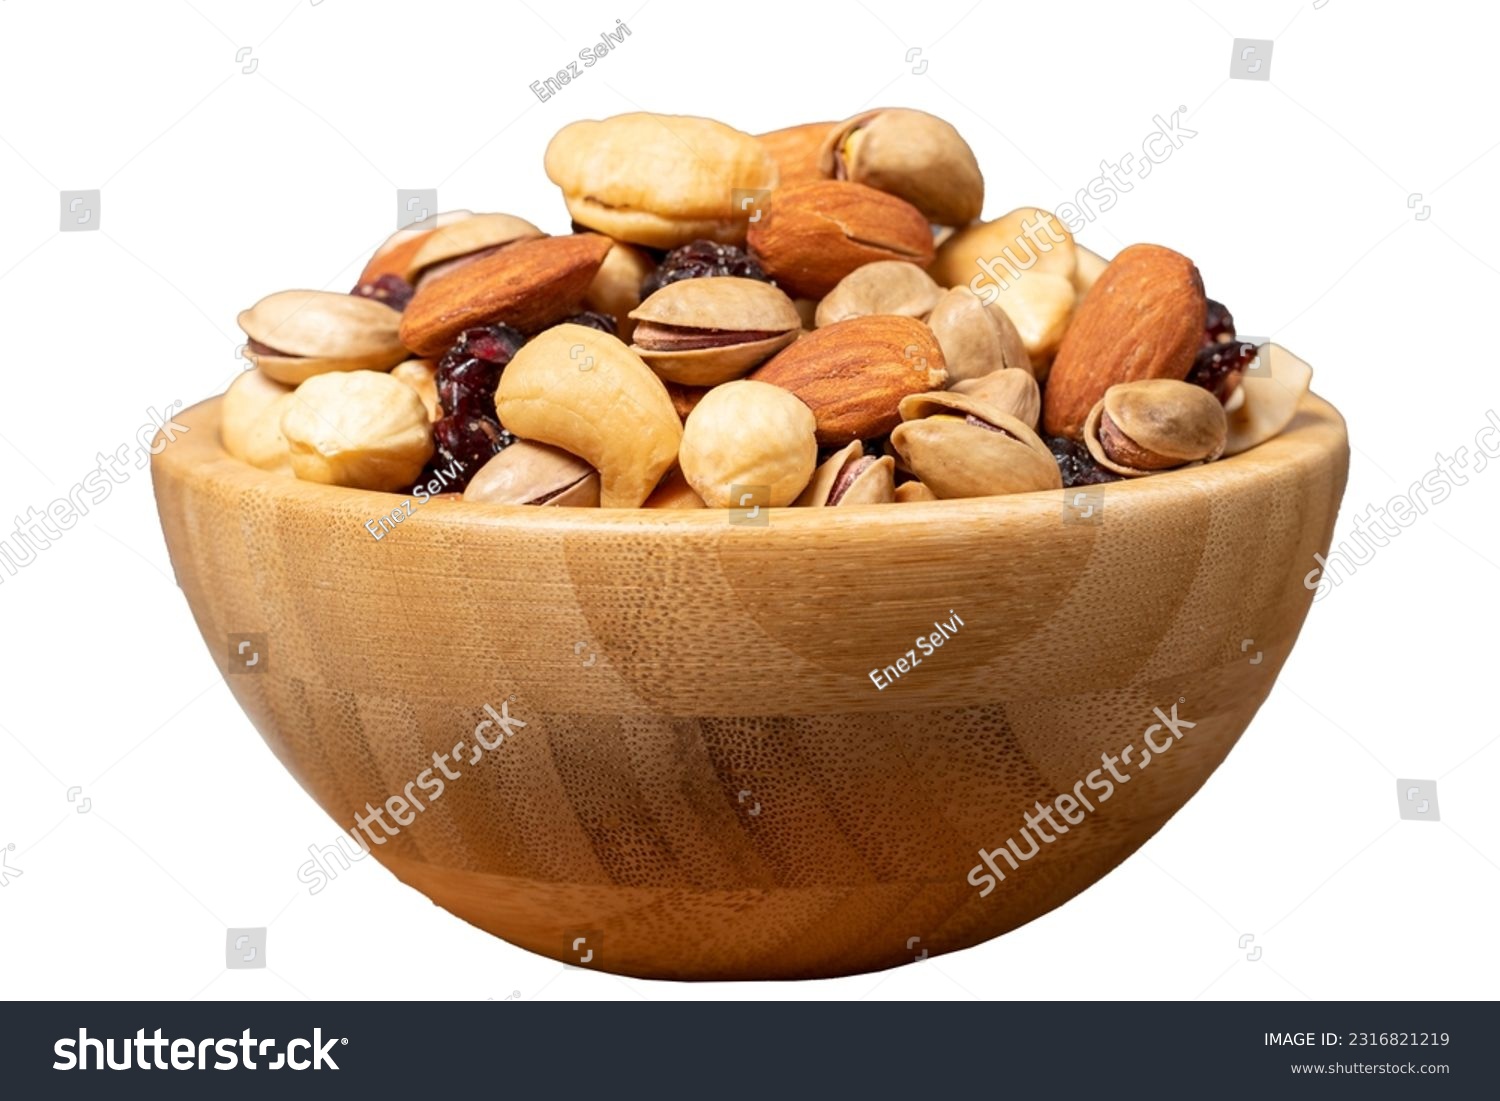 Mixed nuts isolated on white background. Special mixed nuts in wooden bowl. Hazelnut, almond, cashew, pistachio, dried blueberry. Superfood. Vegetarian food concept. healthy snacks #2316821219